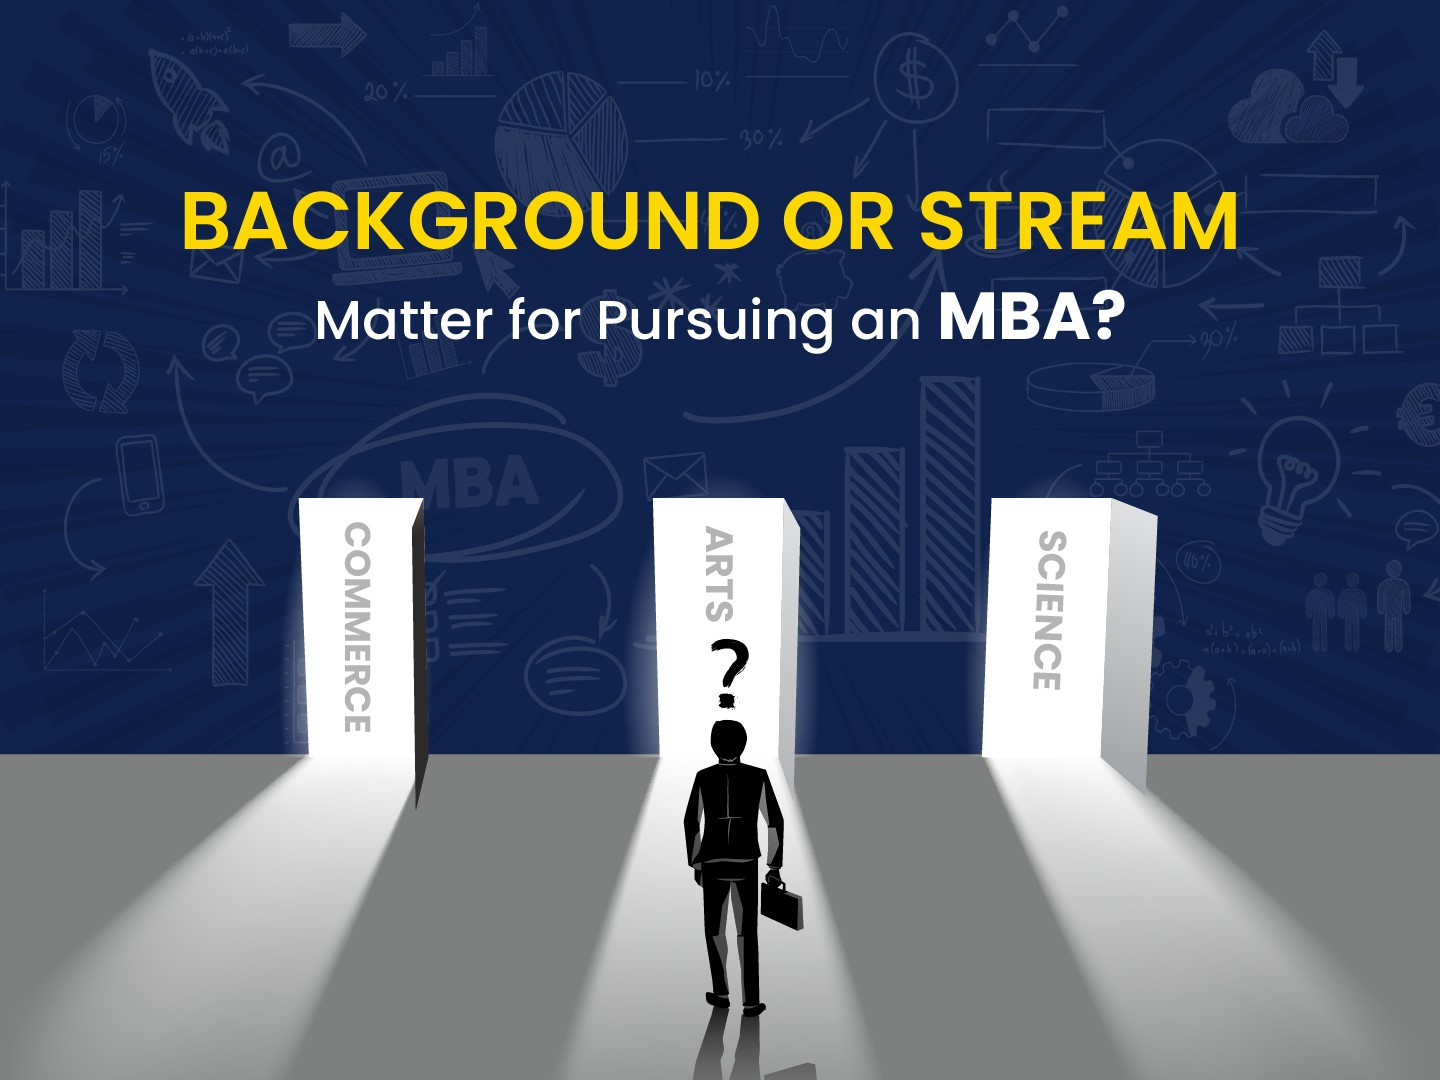 Does Background or Stream Matter for Pursuing an MBA?